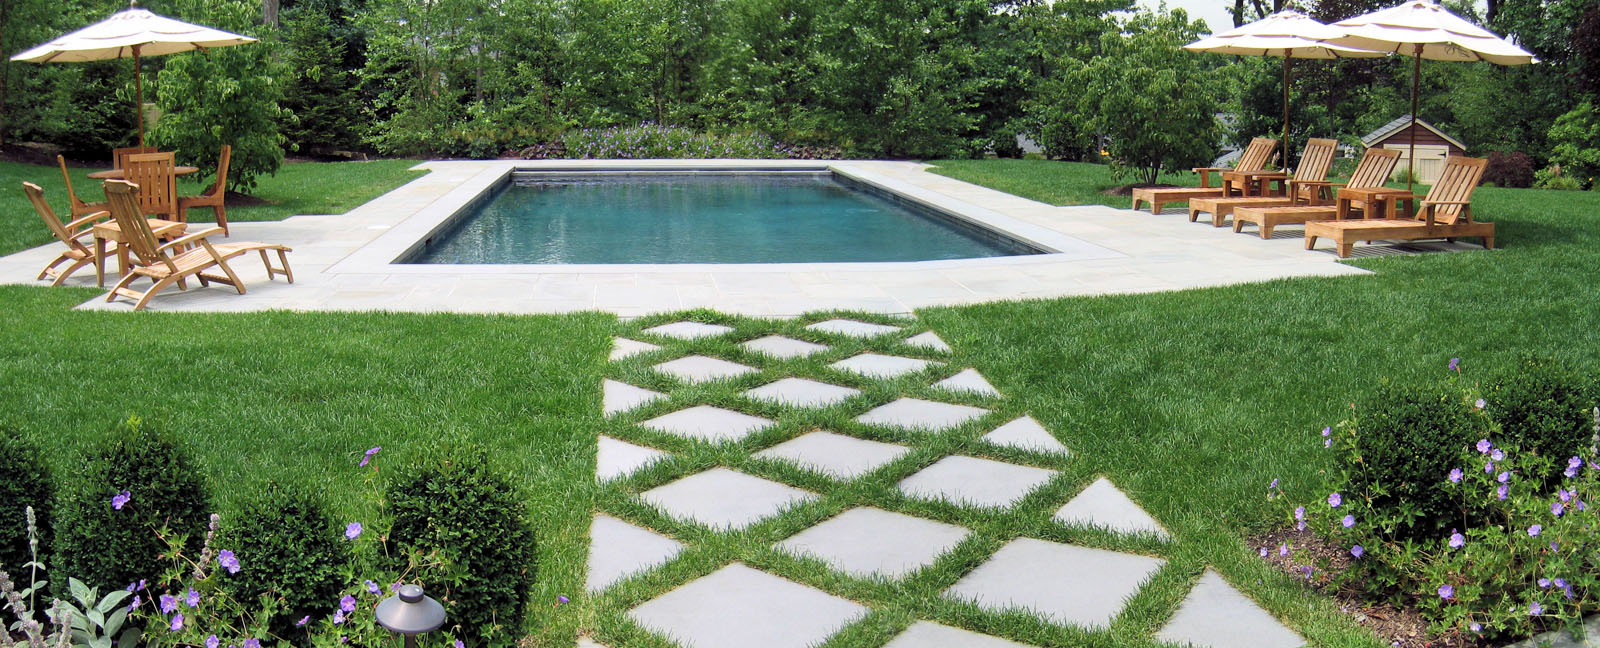 Gray Tennessee Sandstone Stepping Stones Aligned in Traditional Design